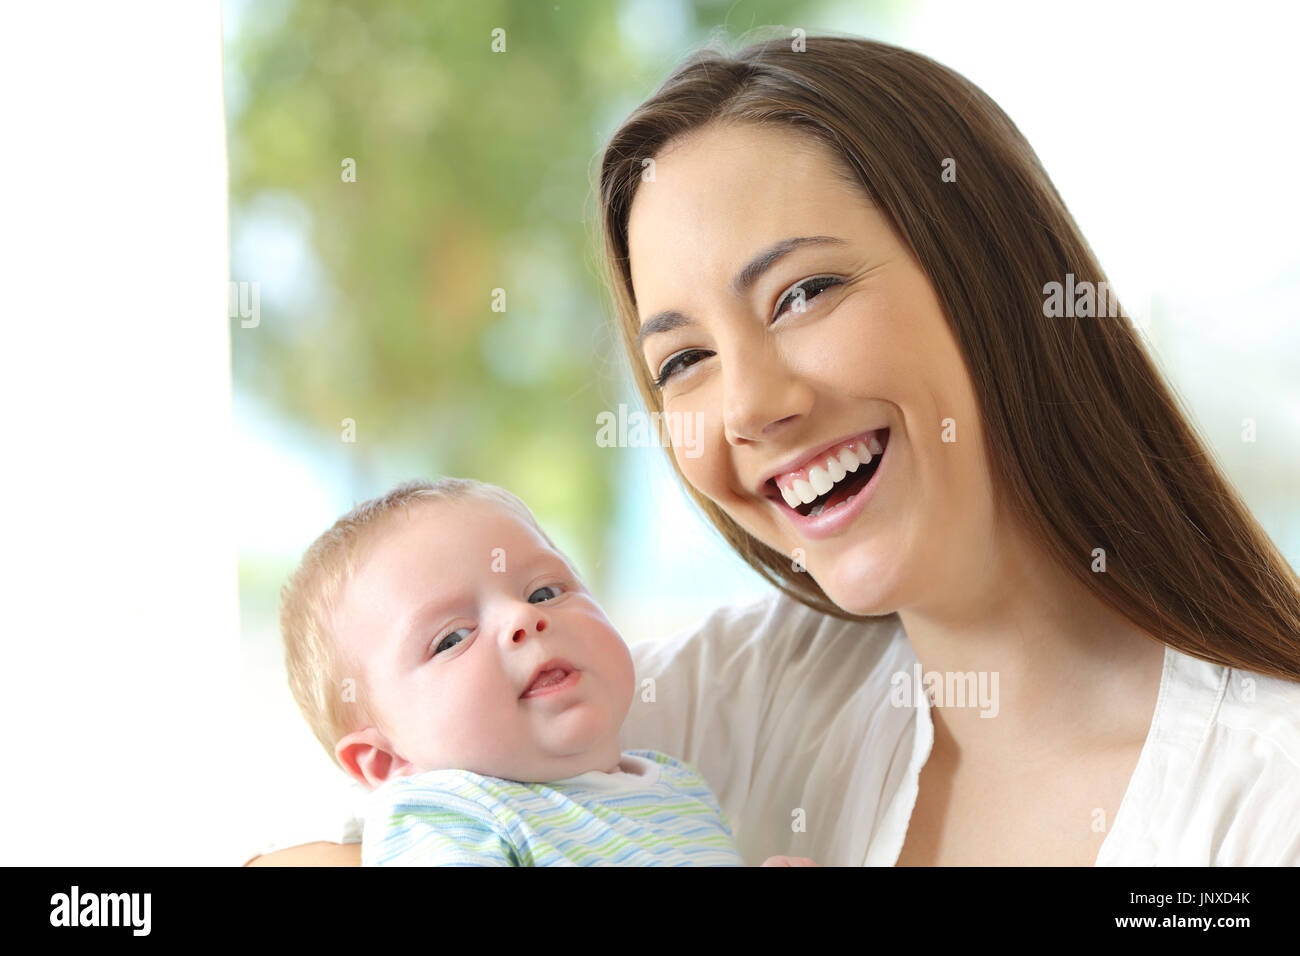 Front view portrait of a happy mother and her baby looking at you Stock Photo